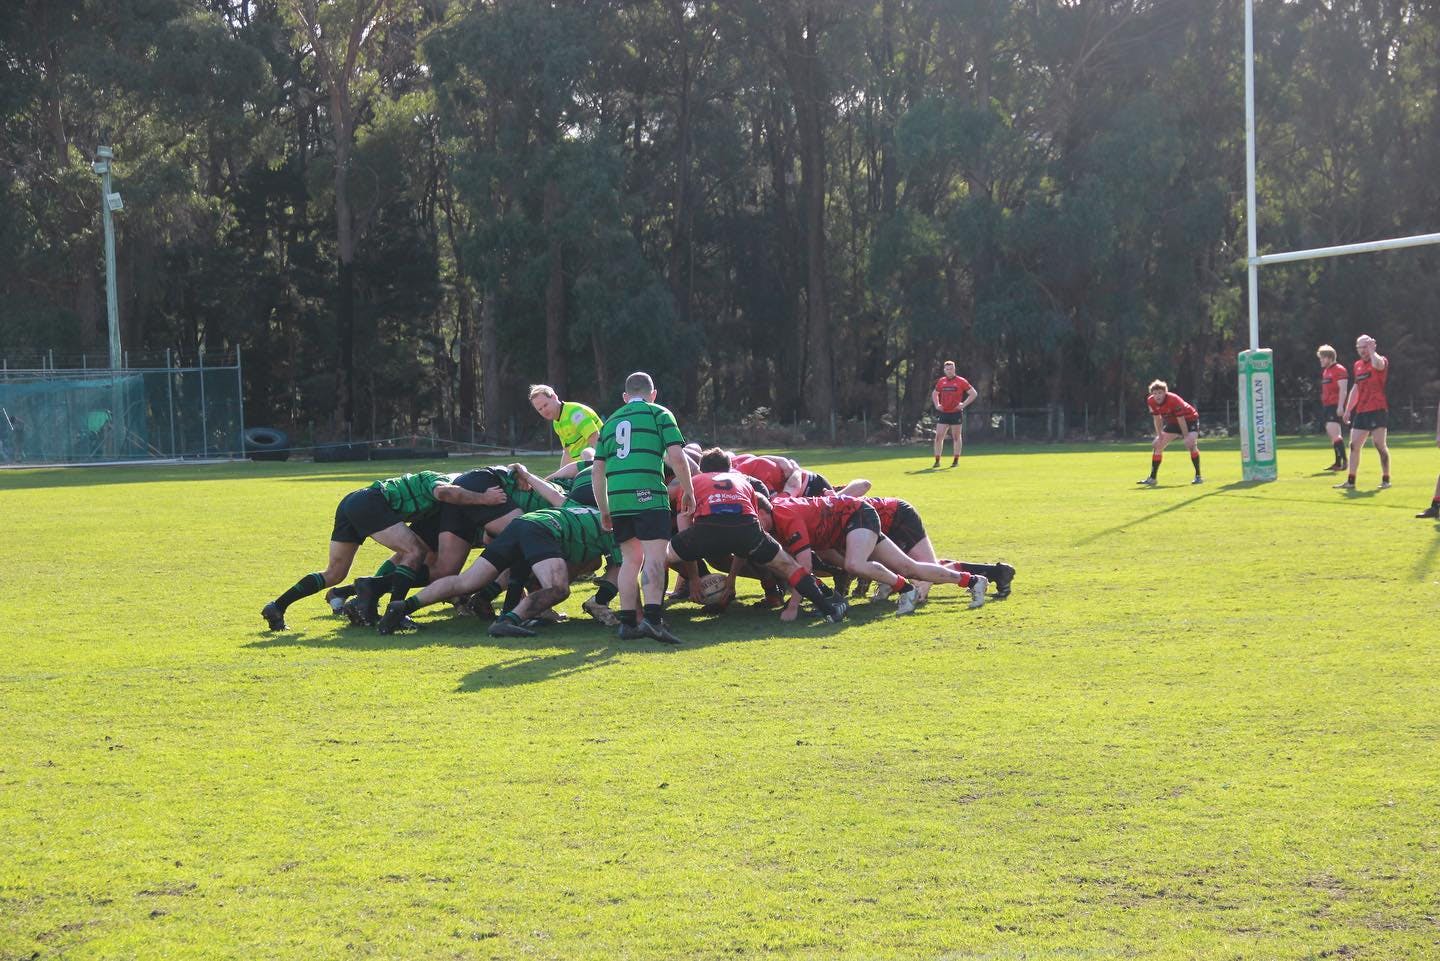 AGAINST THE ODDS: University pulled off one of 2022's biggest TRU upsets last year beating Devonport on the road - can they do it again this weekend?